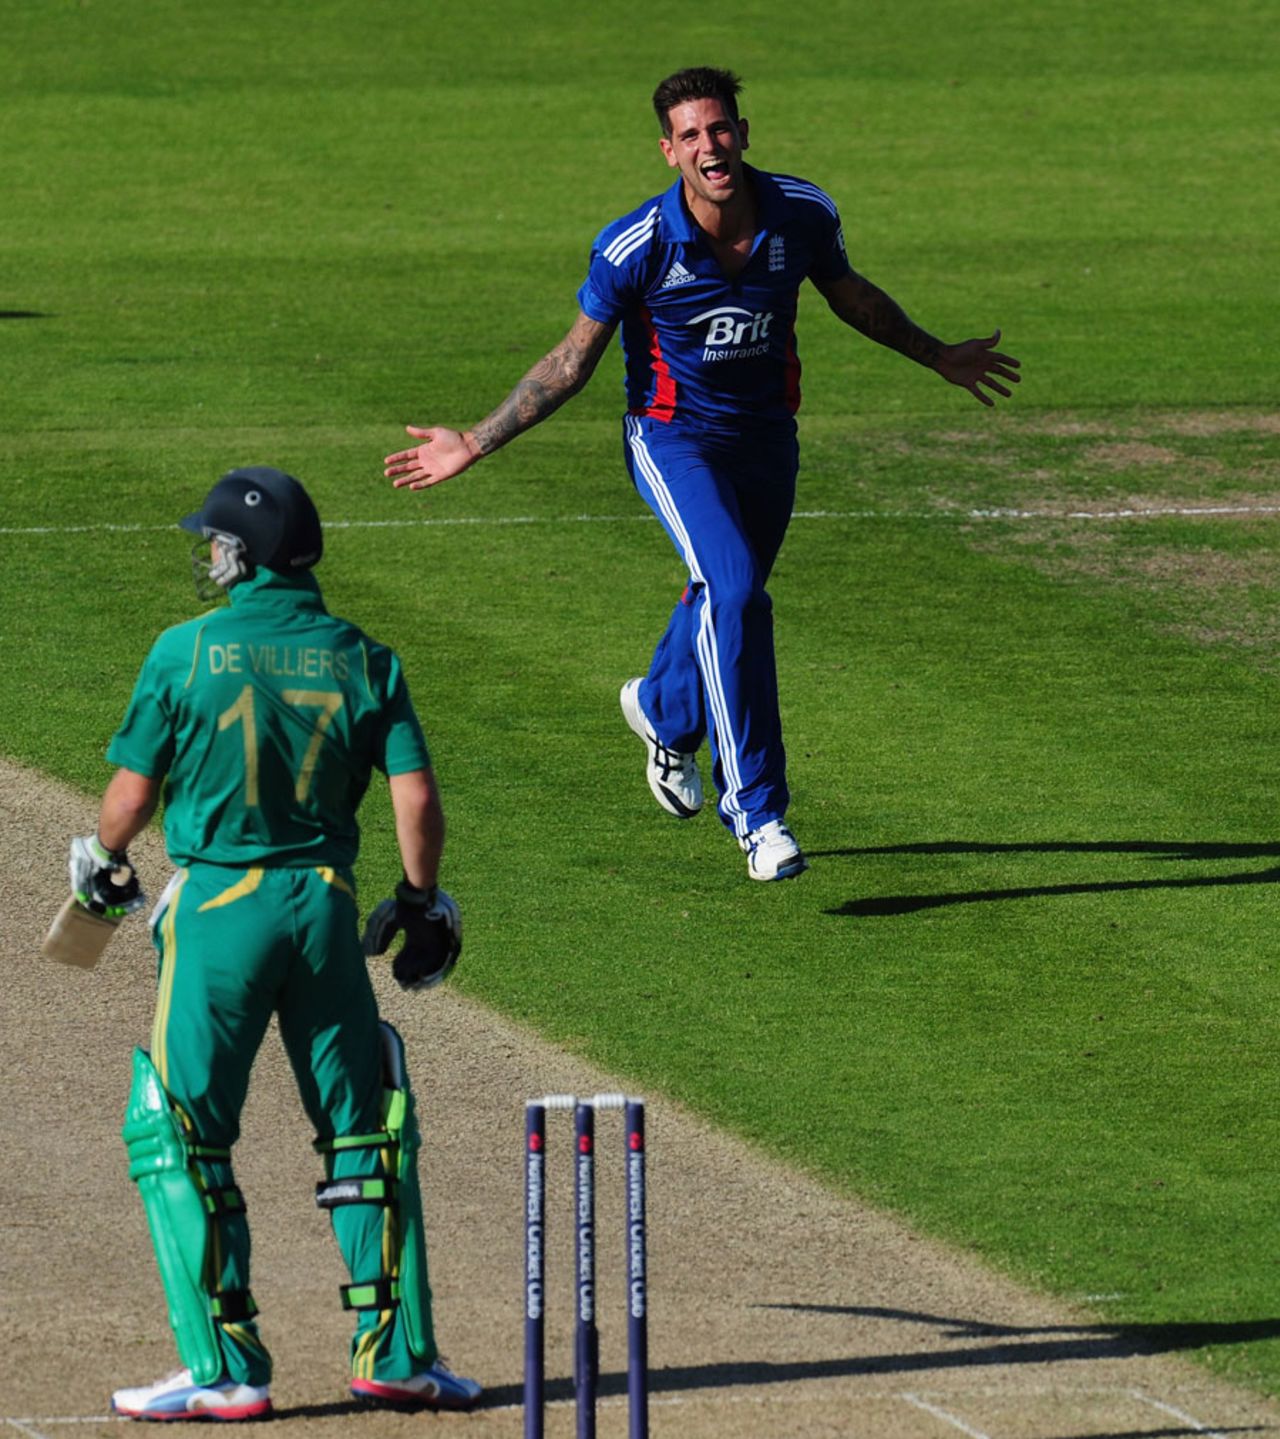 Jade Dernbach had AB de Villiers caught behind, England v South Africa, 1st NatWest T20I, Chester-le-Street, September 8, 2012